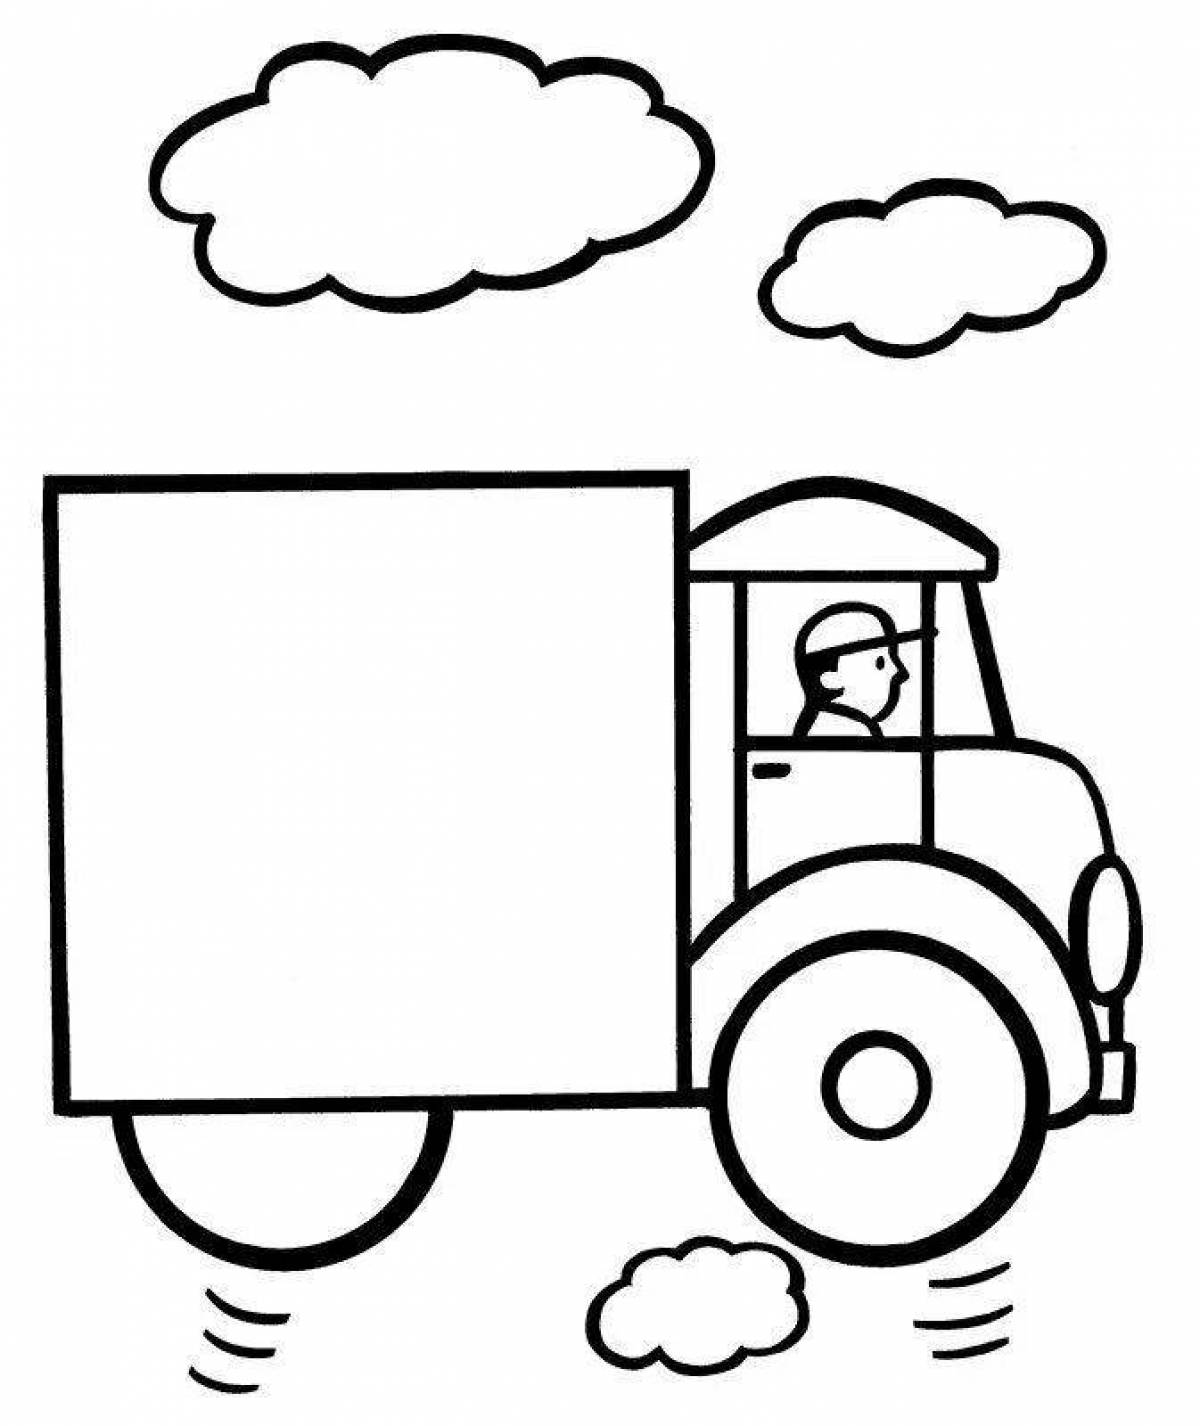 Fun truck coloring book for 2-3 year olds